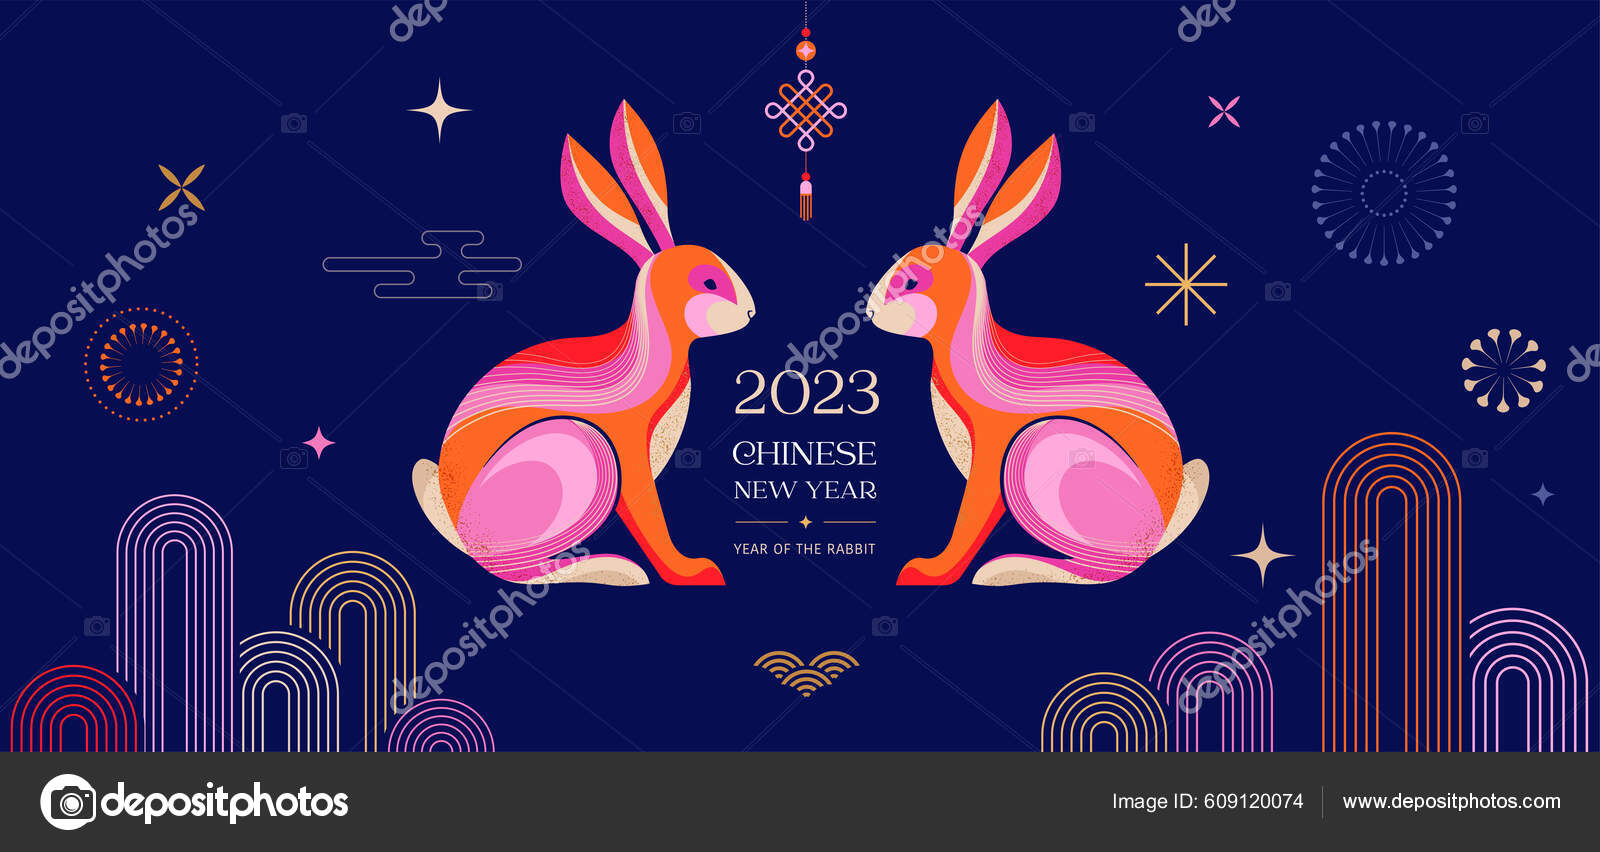 Lunar new year, Chinese New Year 2023 , Year of the Rabbit, Stock vector